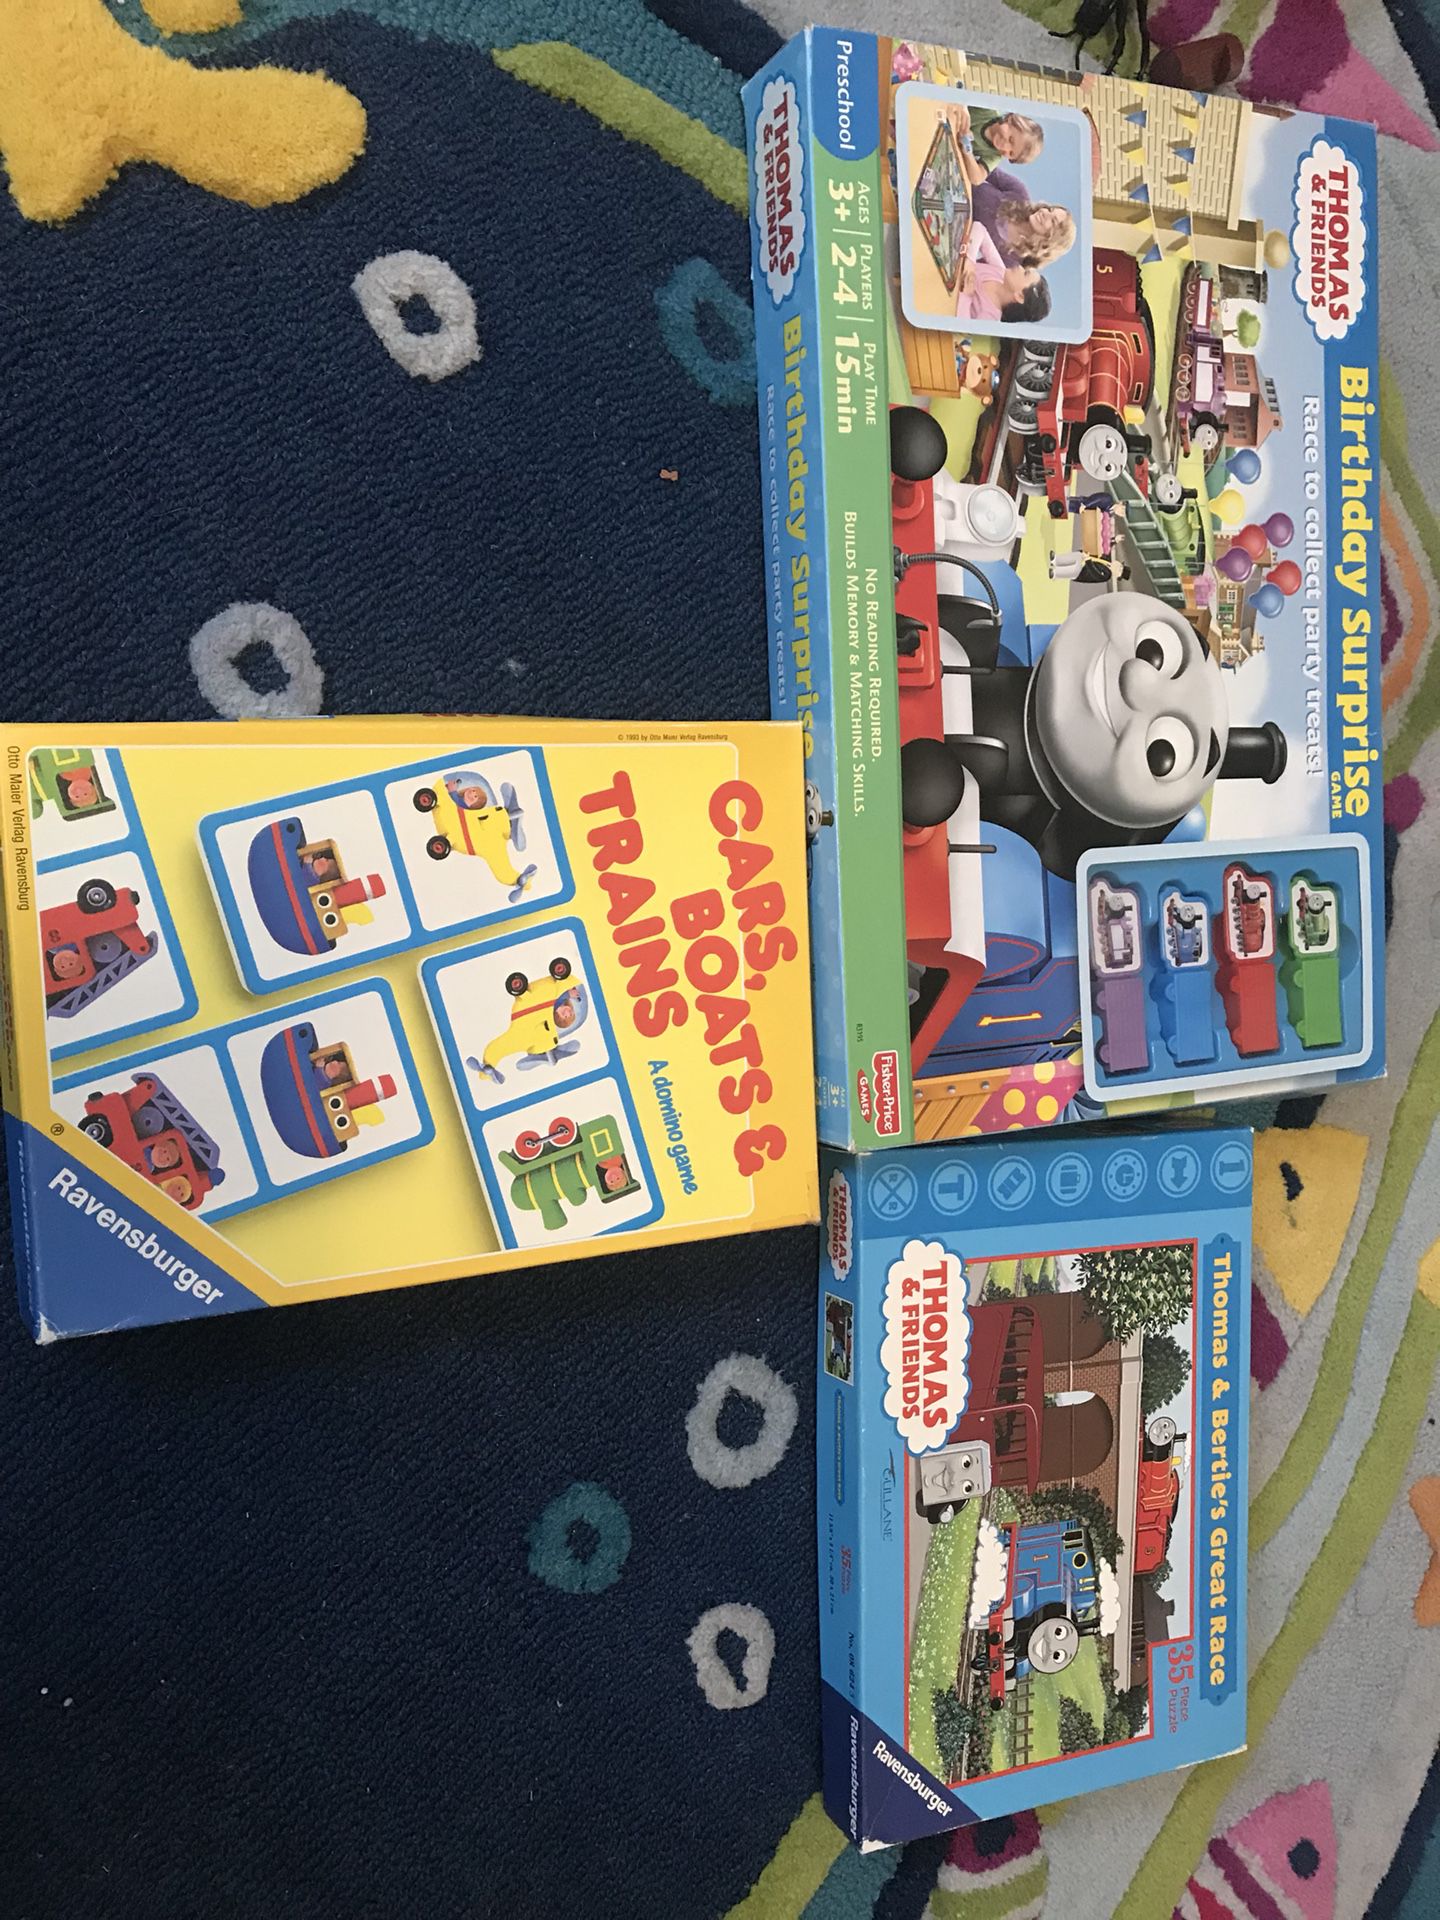 Thomas the train game and puzzles and domino game